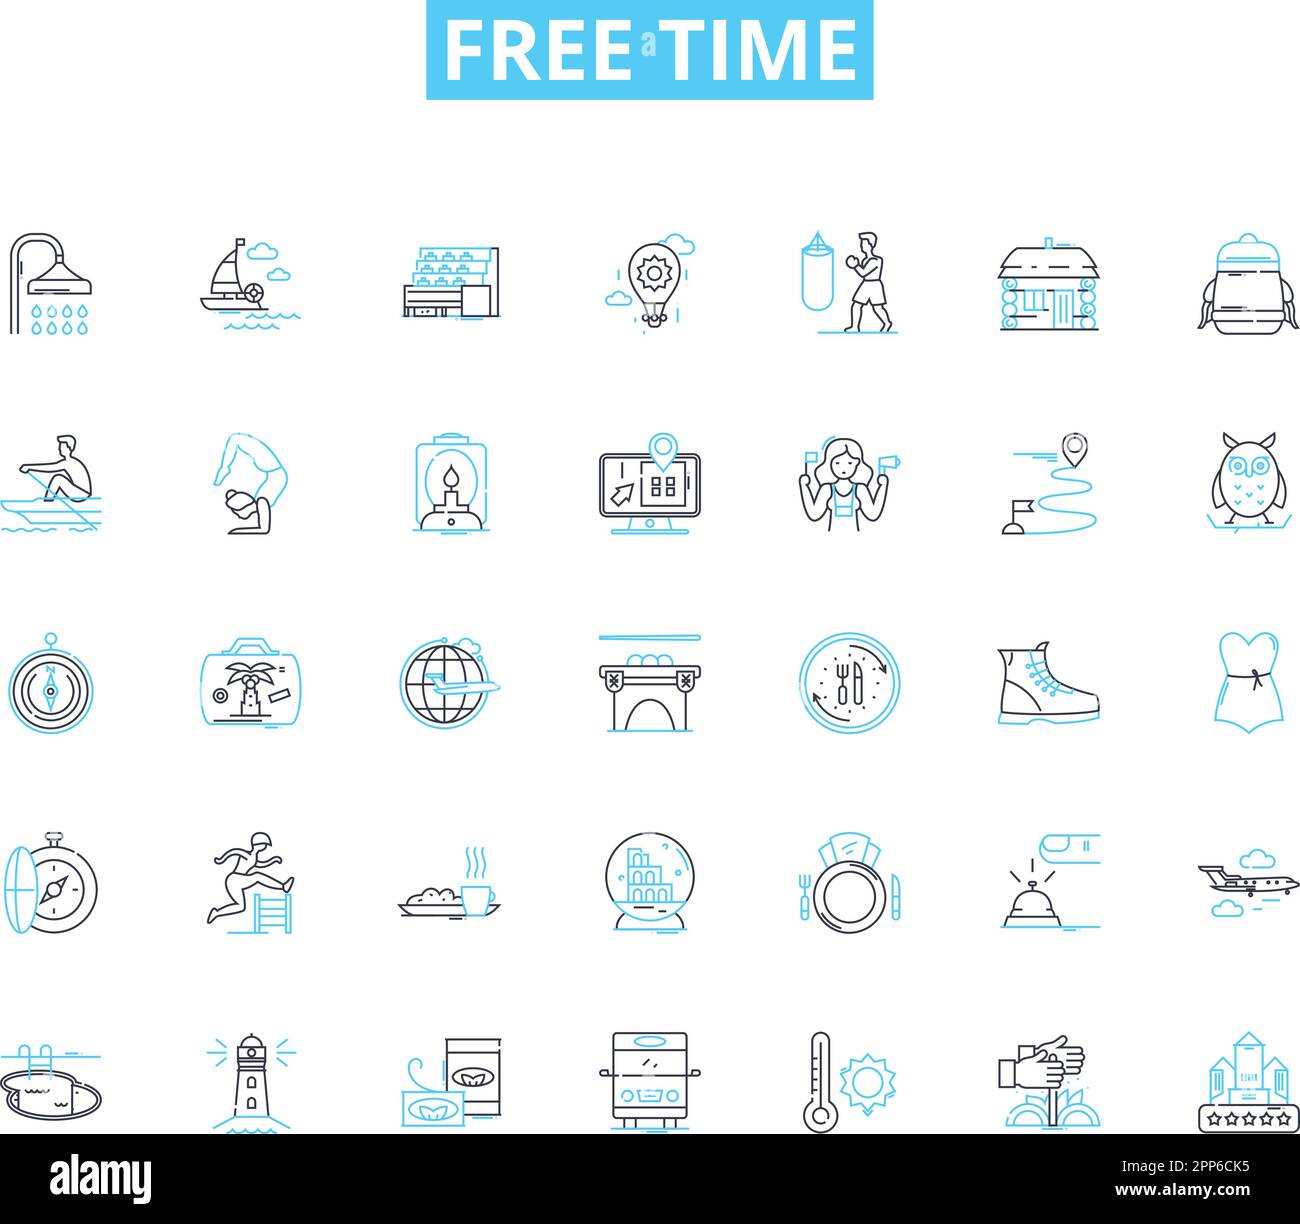 Free time linear icons set. Leisure, Relaxation, Hobbies, Pastimes, Recreation, Amusement, Entertainment line vector and concept signs. Pursuits Stock Vector